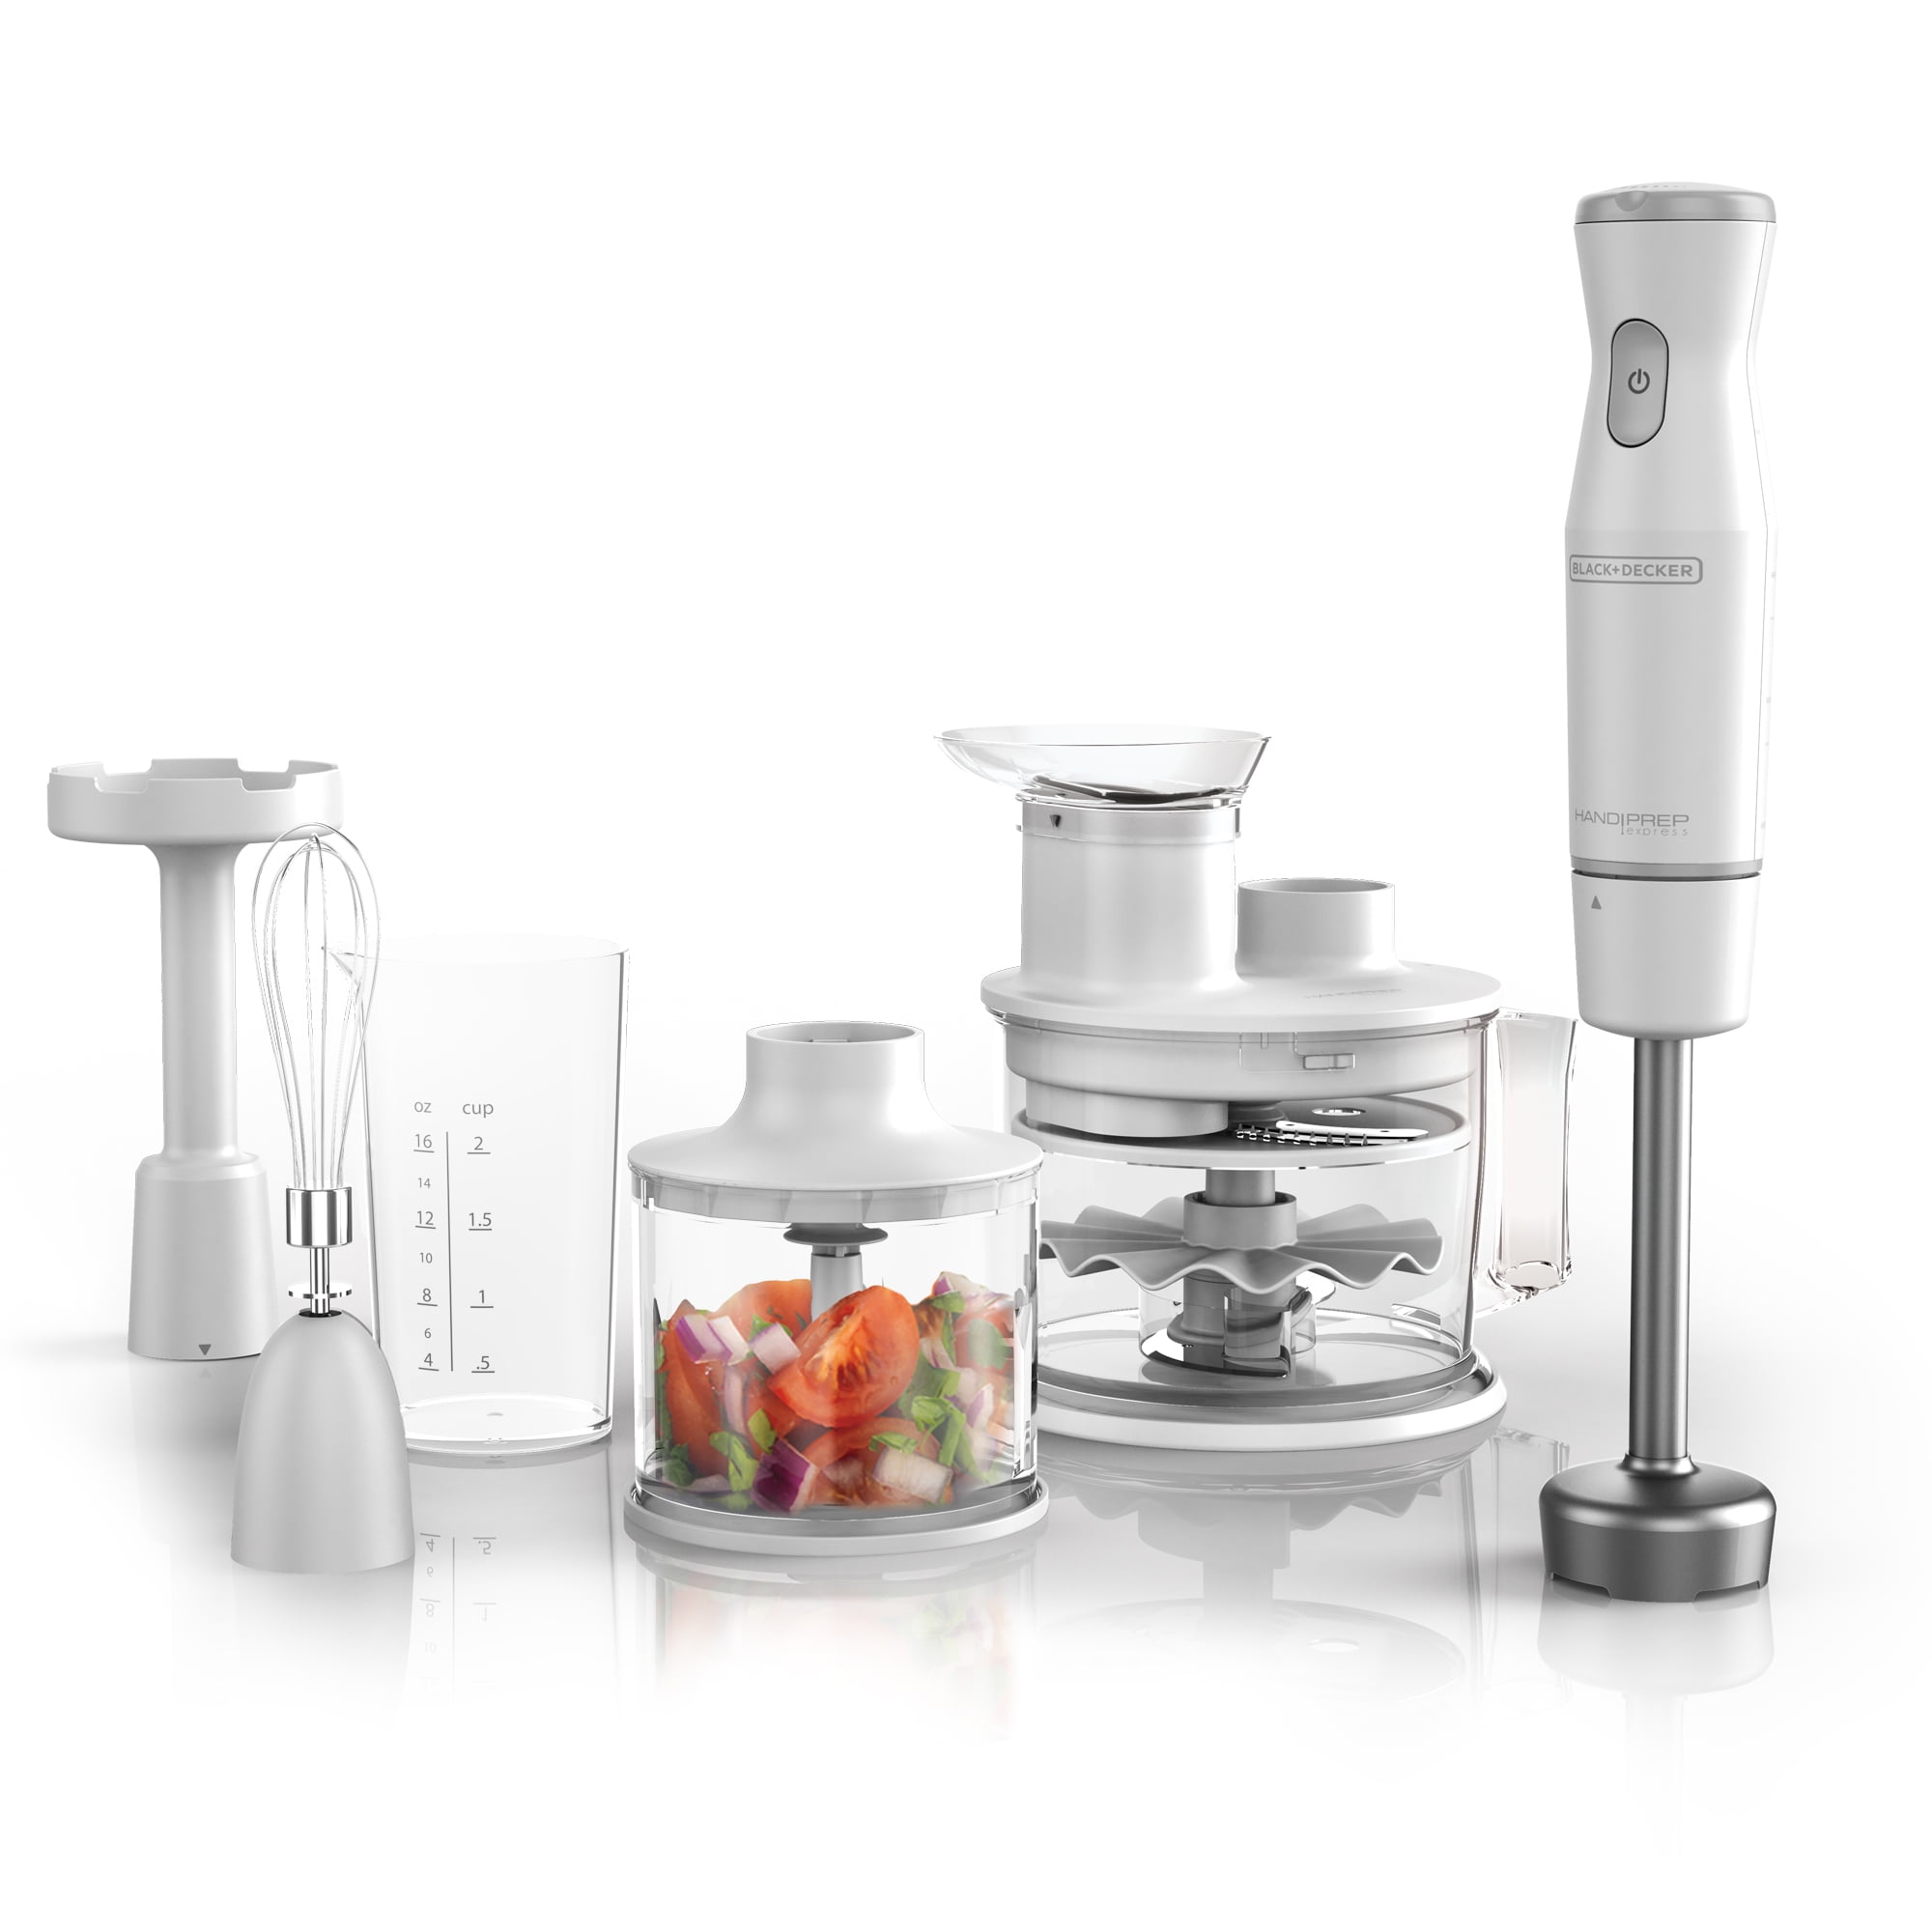 TechGlare Deals on X: Personal Blender 500 W Mixer Grinder at Rs